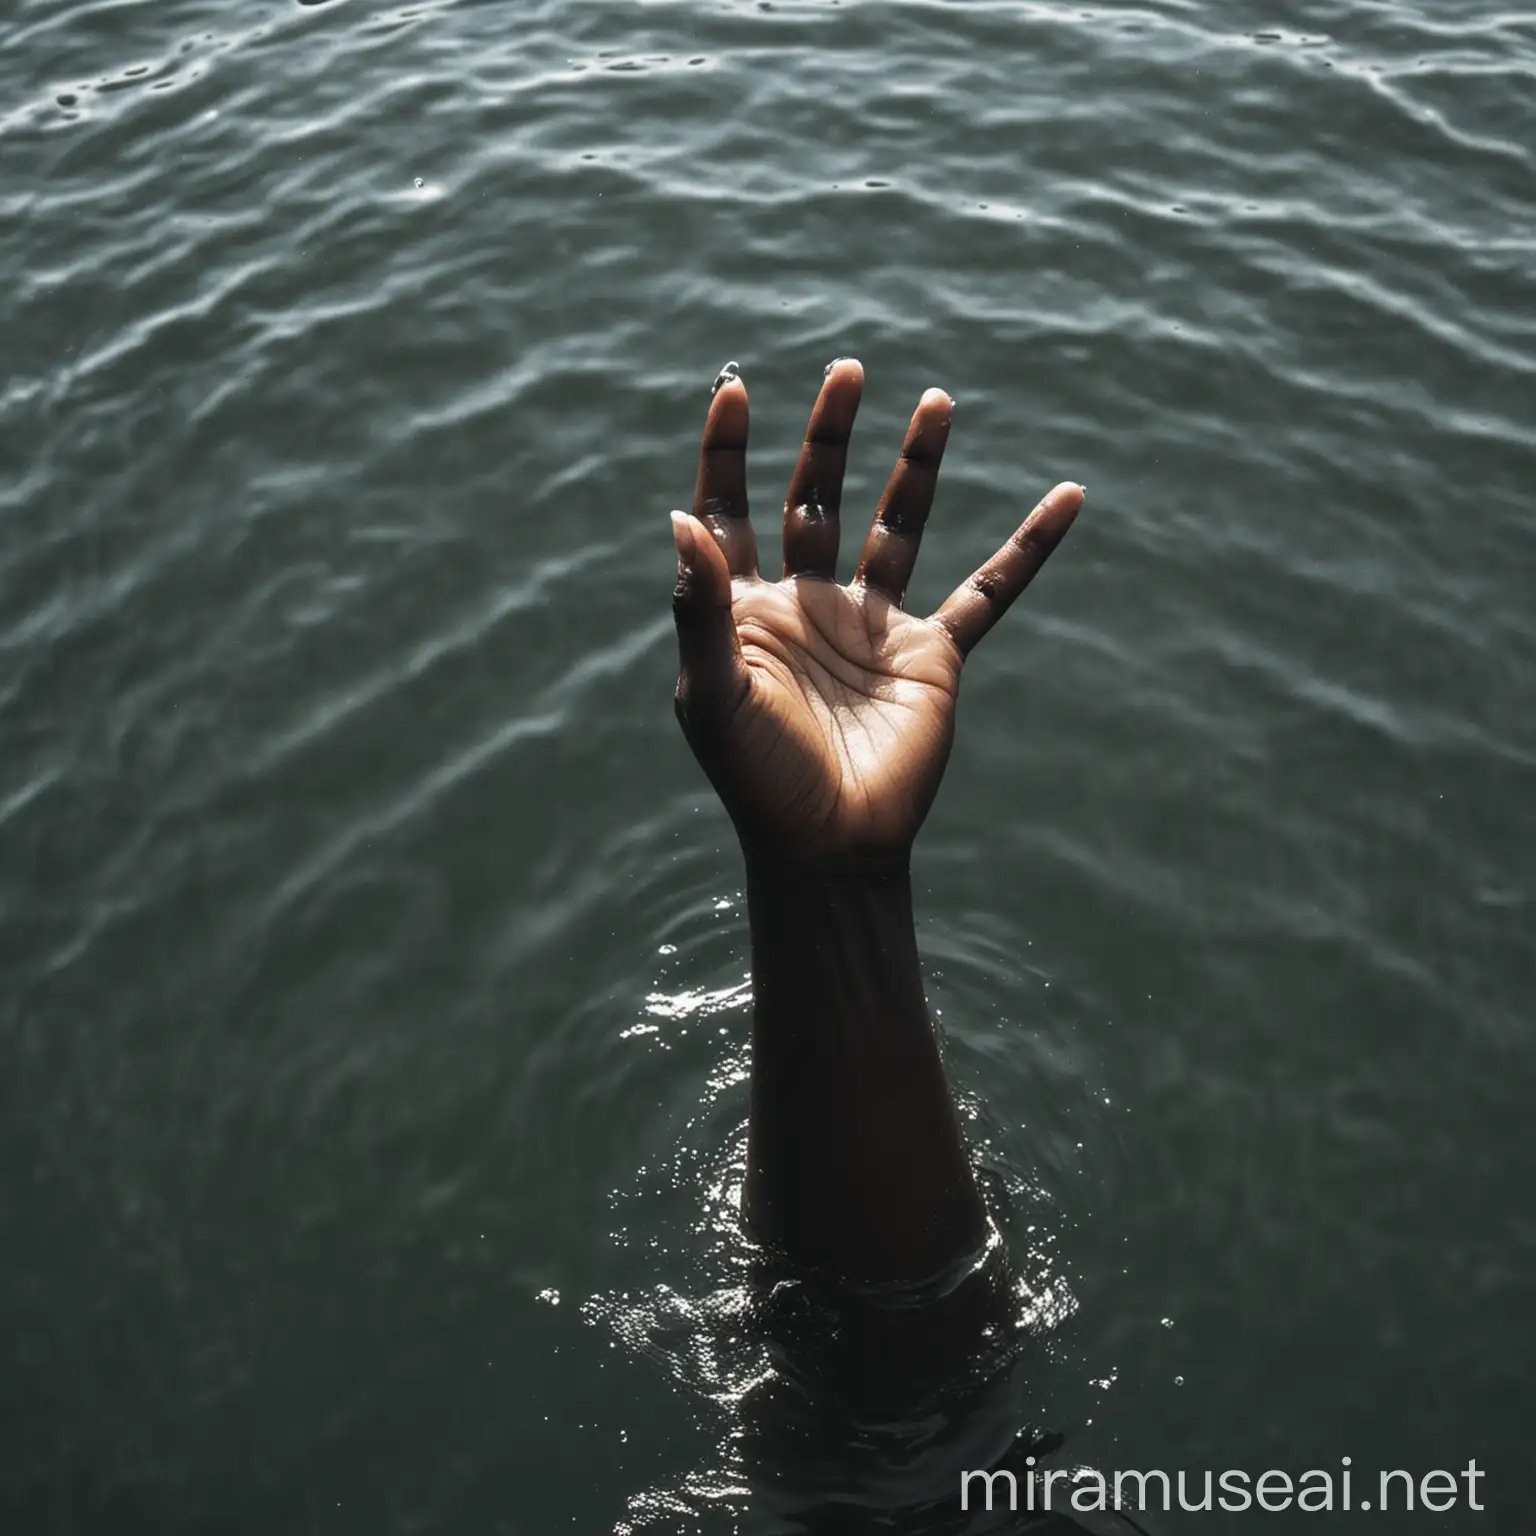 darkskin hand reaching up from water, for graphic tee